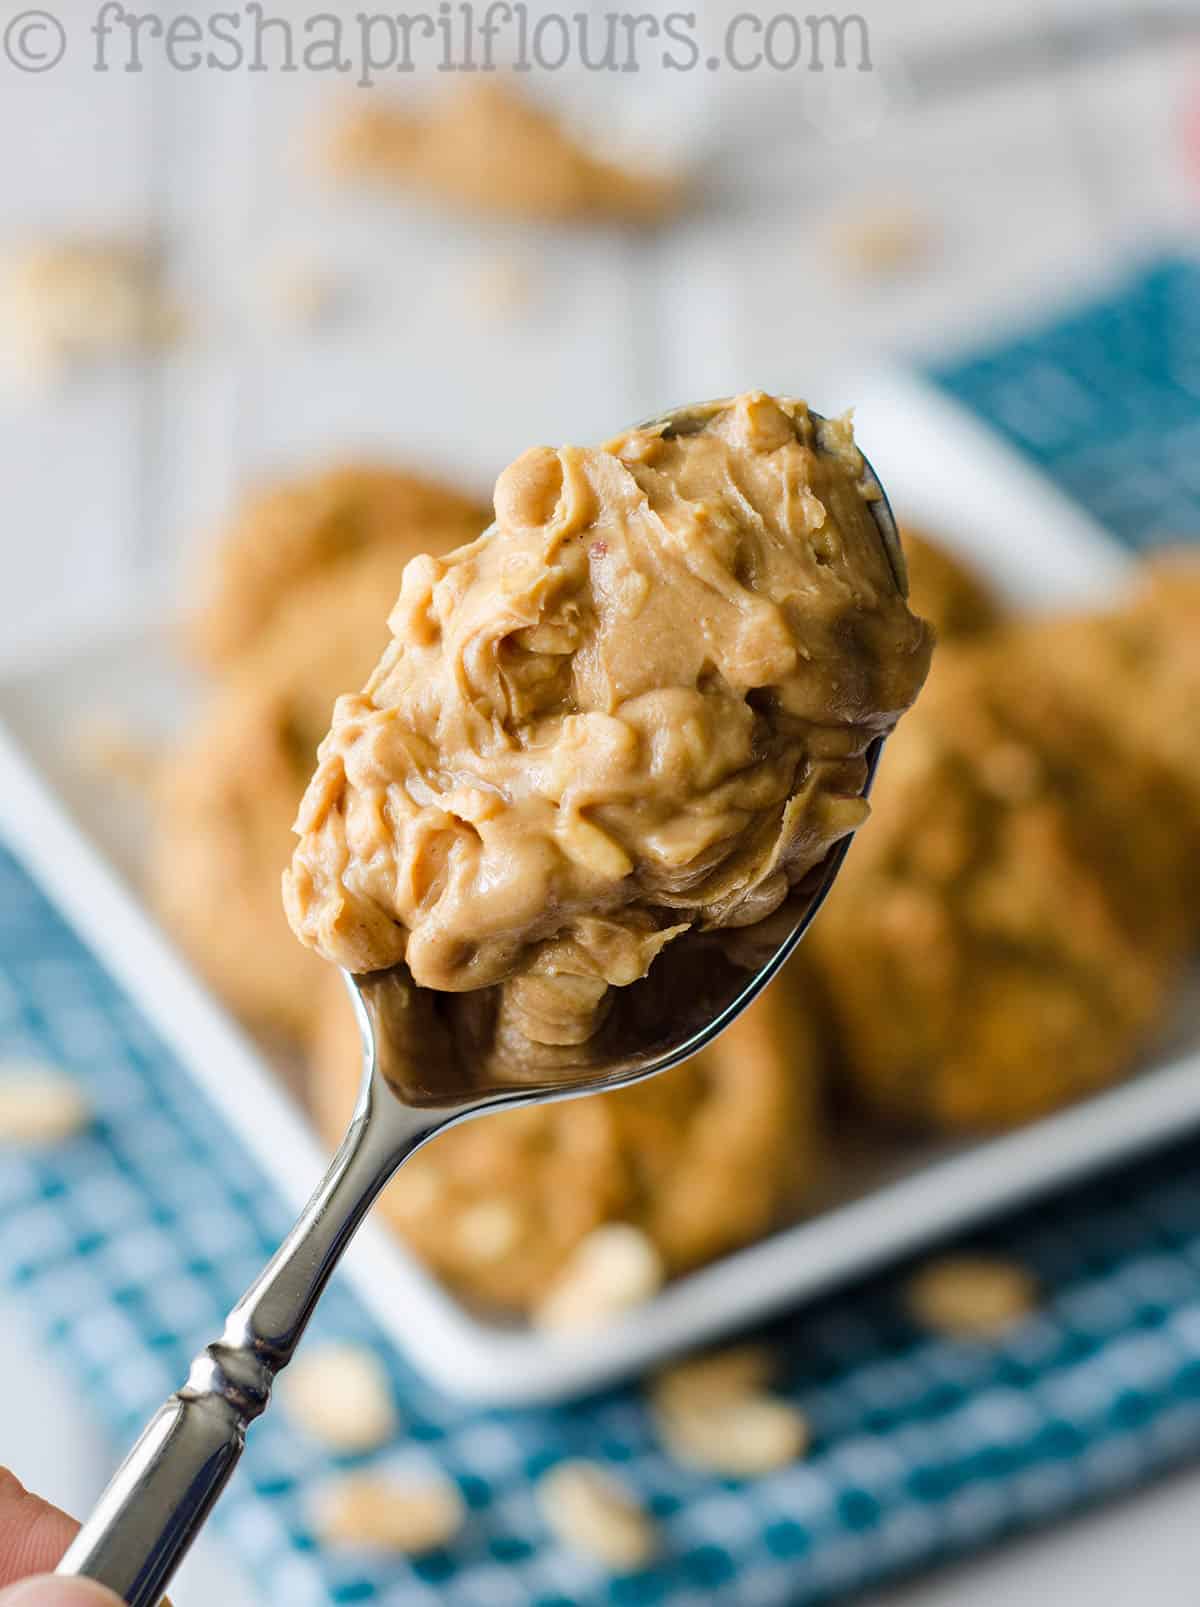 A spoon with crunchy peanut butter on it.